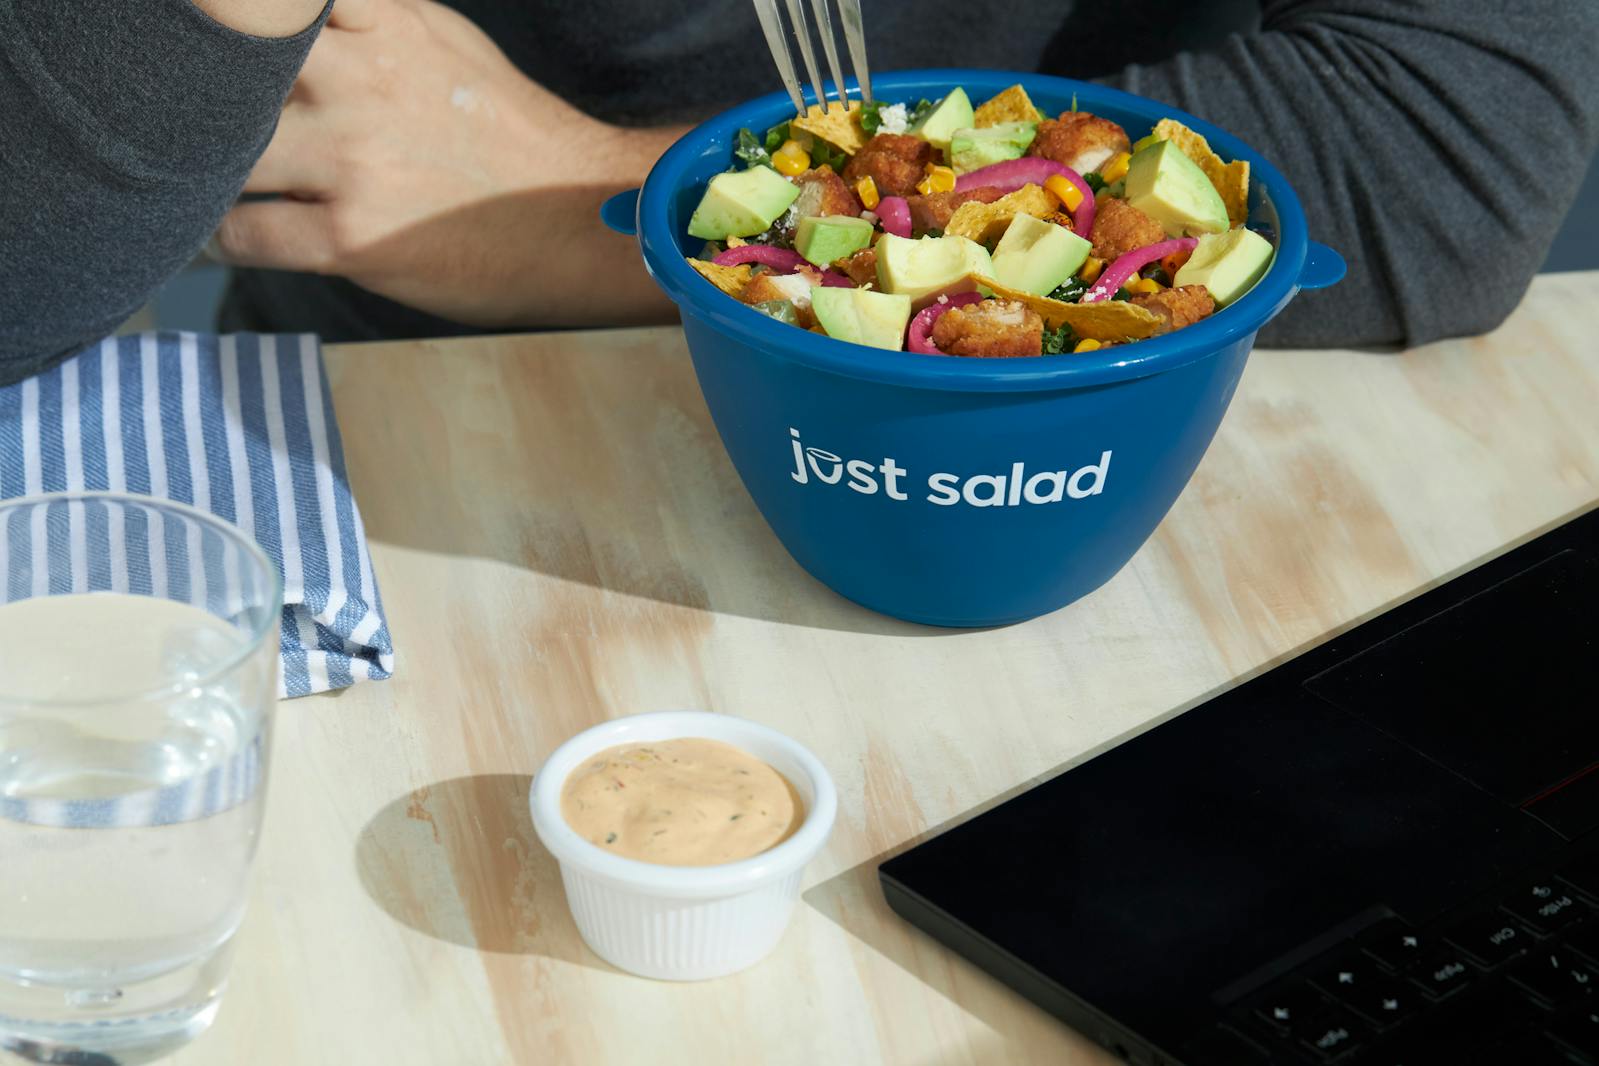 Image of Just Salad bowl sitting on a table next to a side of dressing and a glass of water